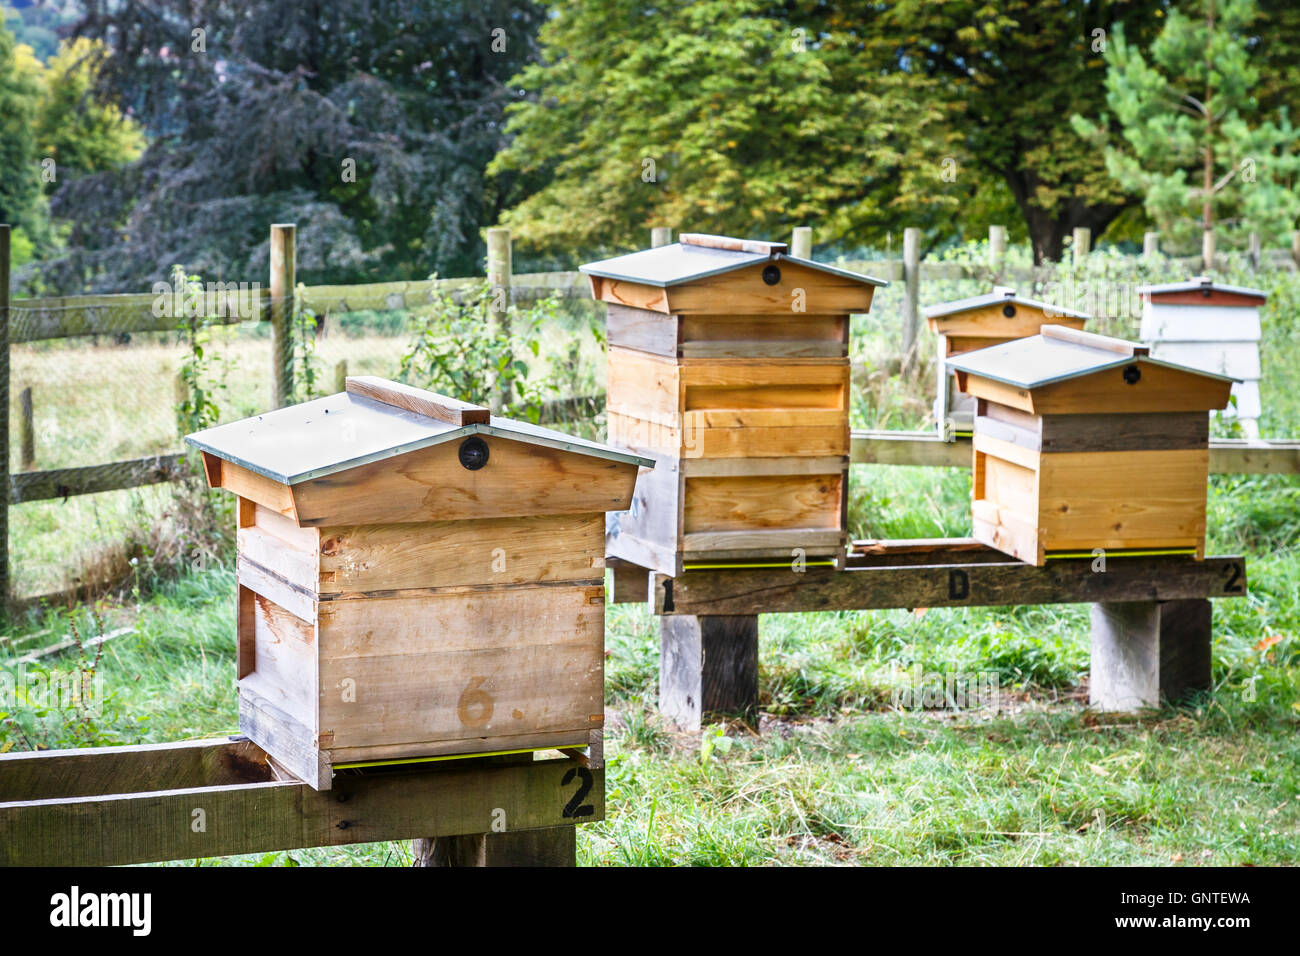 Beekeeping: several modern wooden beehives, encouraging bees for pollination and honey production Stock Photo